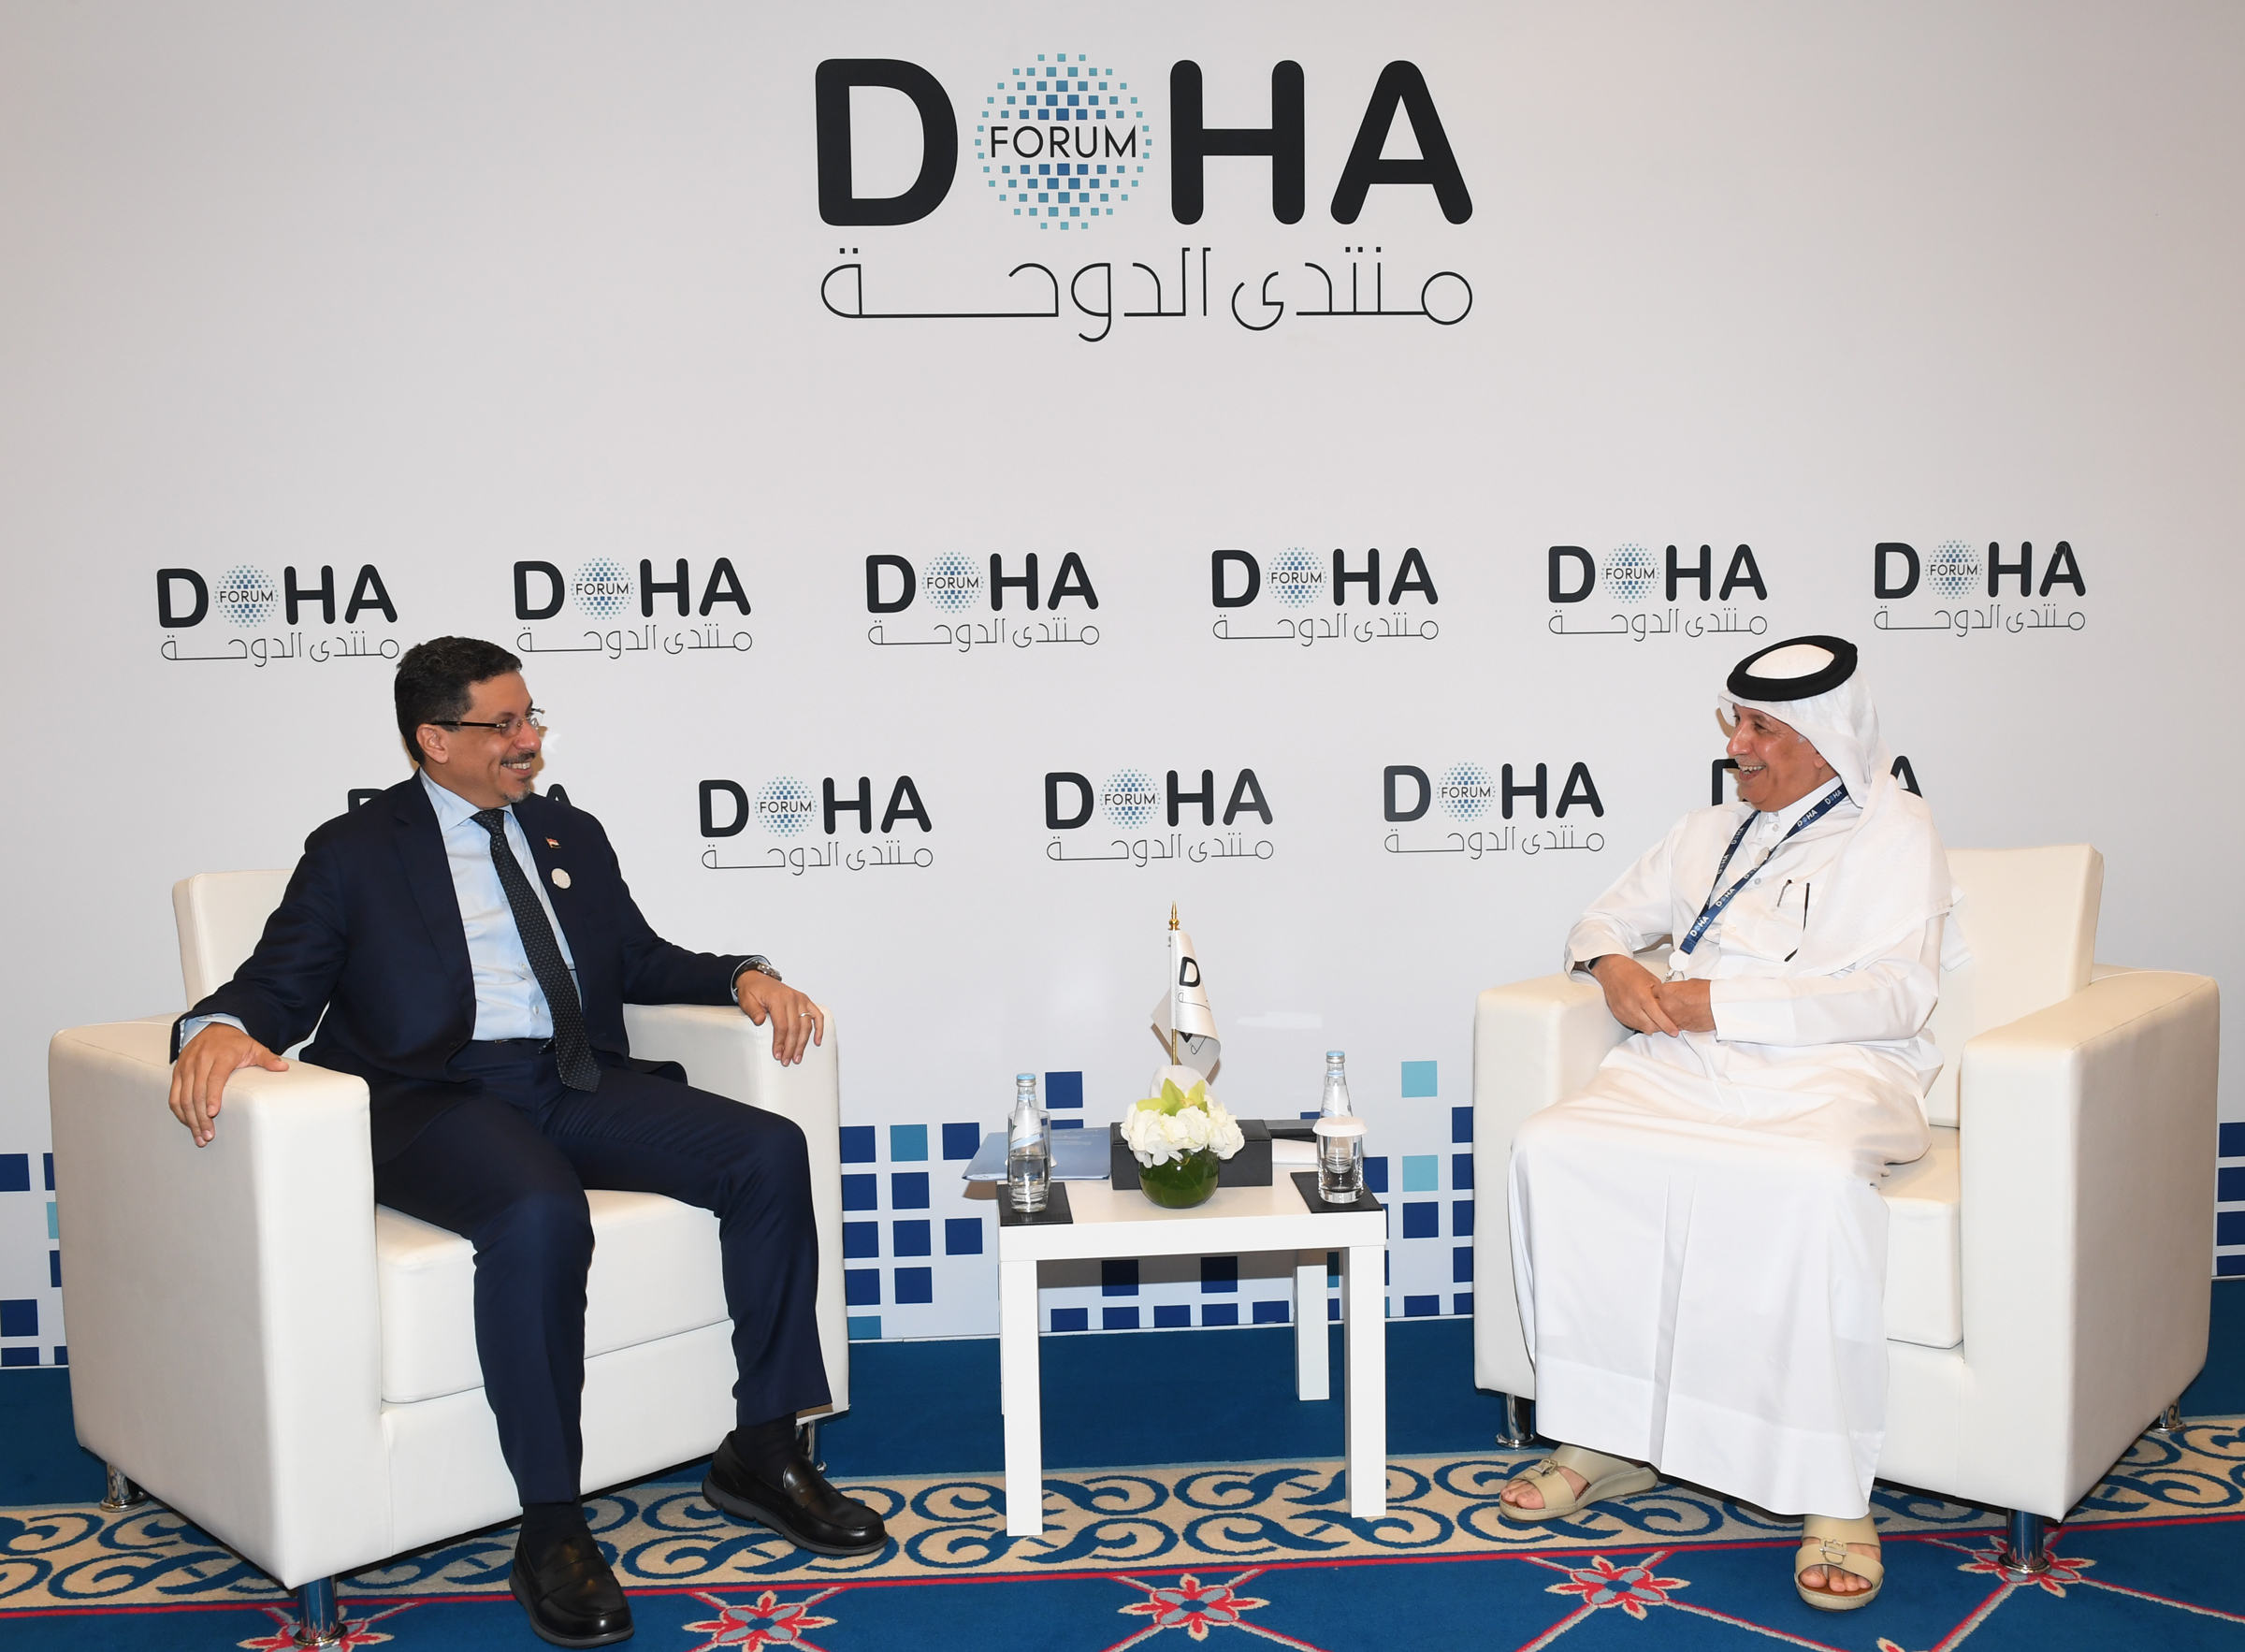 Minister of State for Foreign Affairs Meets Foreign Ministers of Yemen, Sri Lanka on Sidelines of Doha Forum